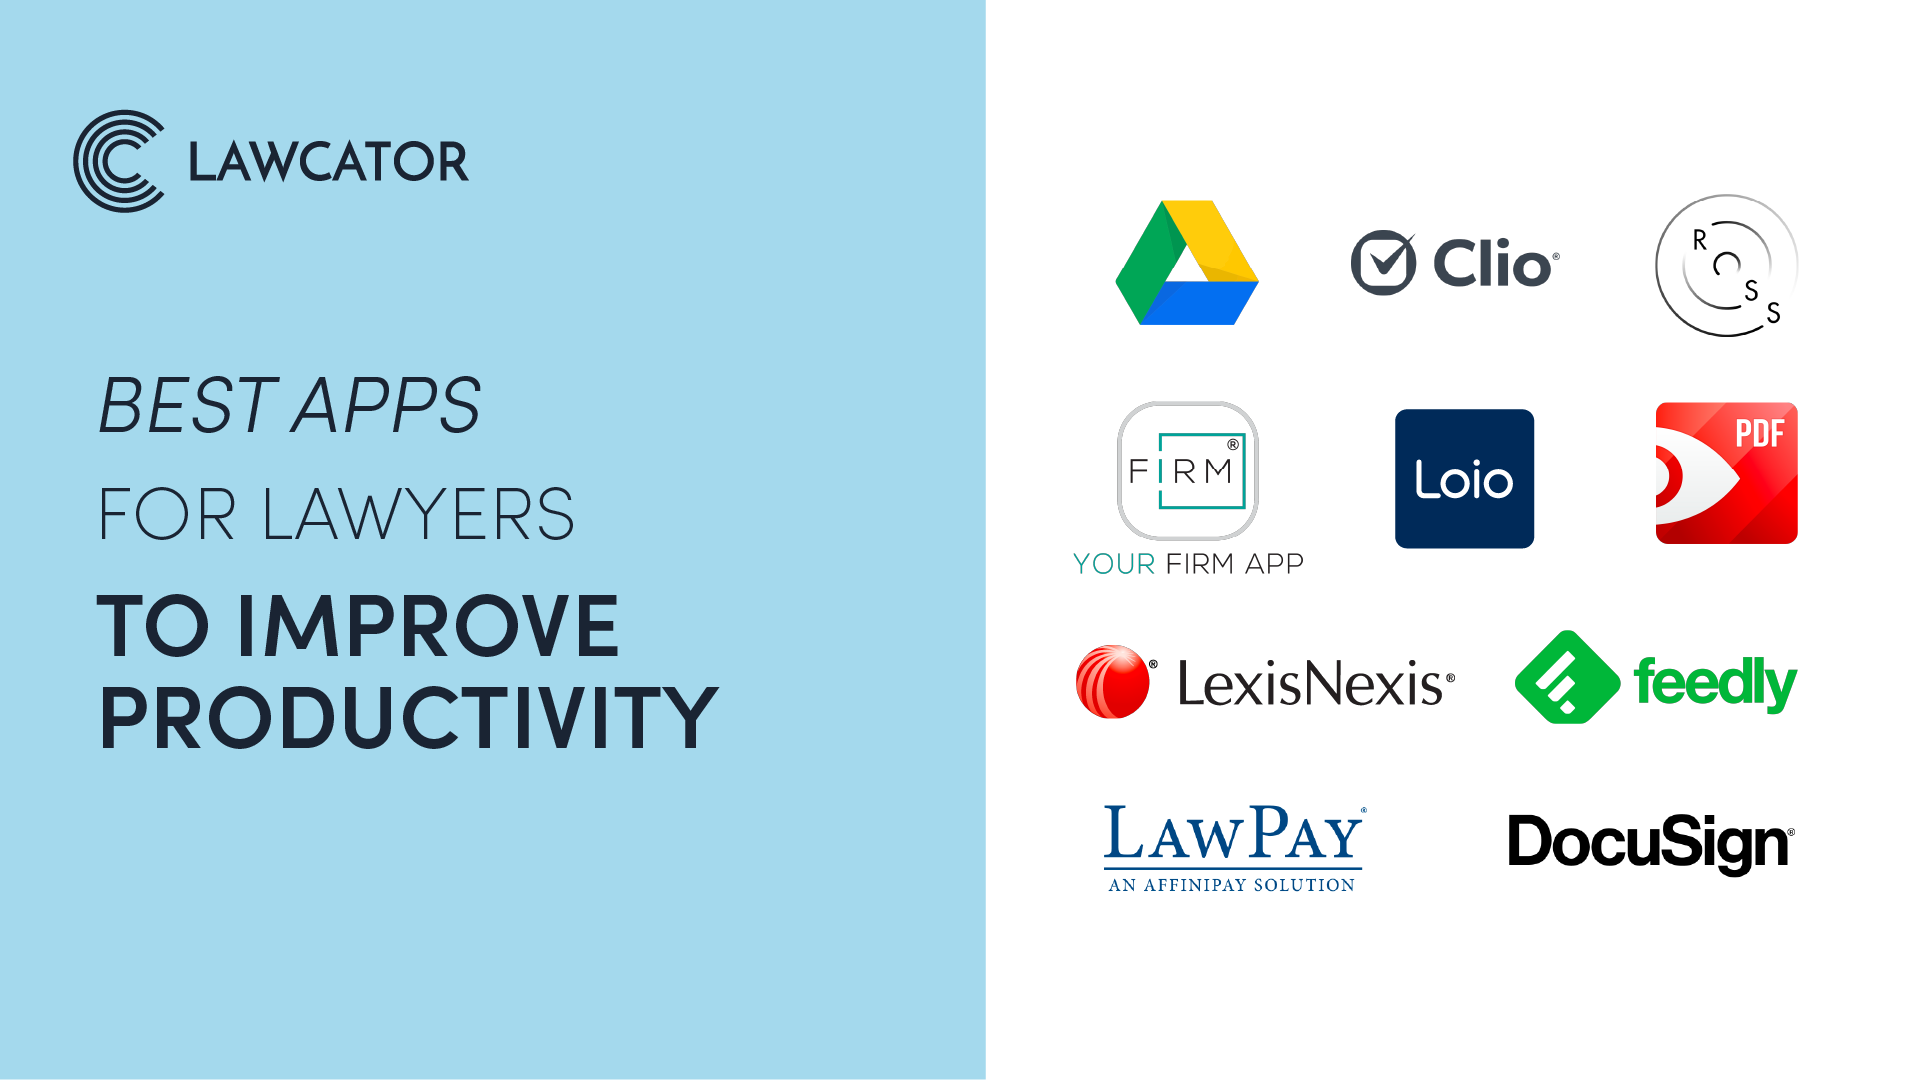 Best Apps for Lawyers to Improve Productivity